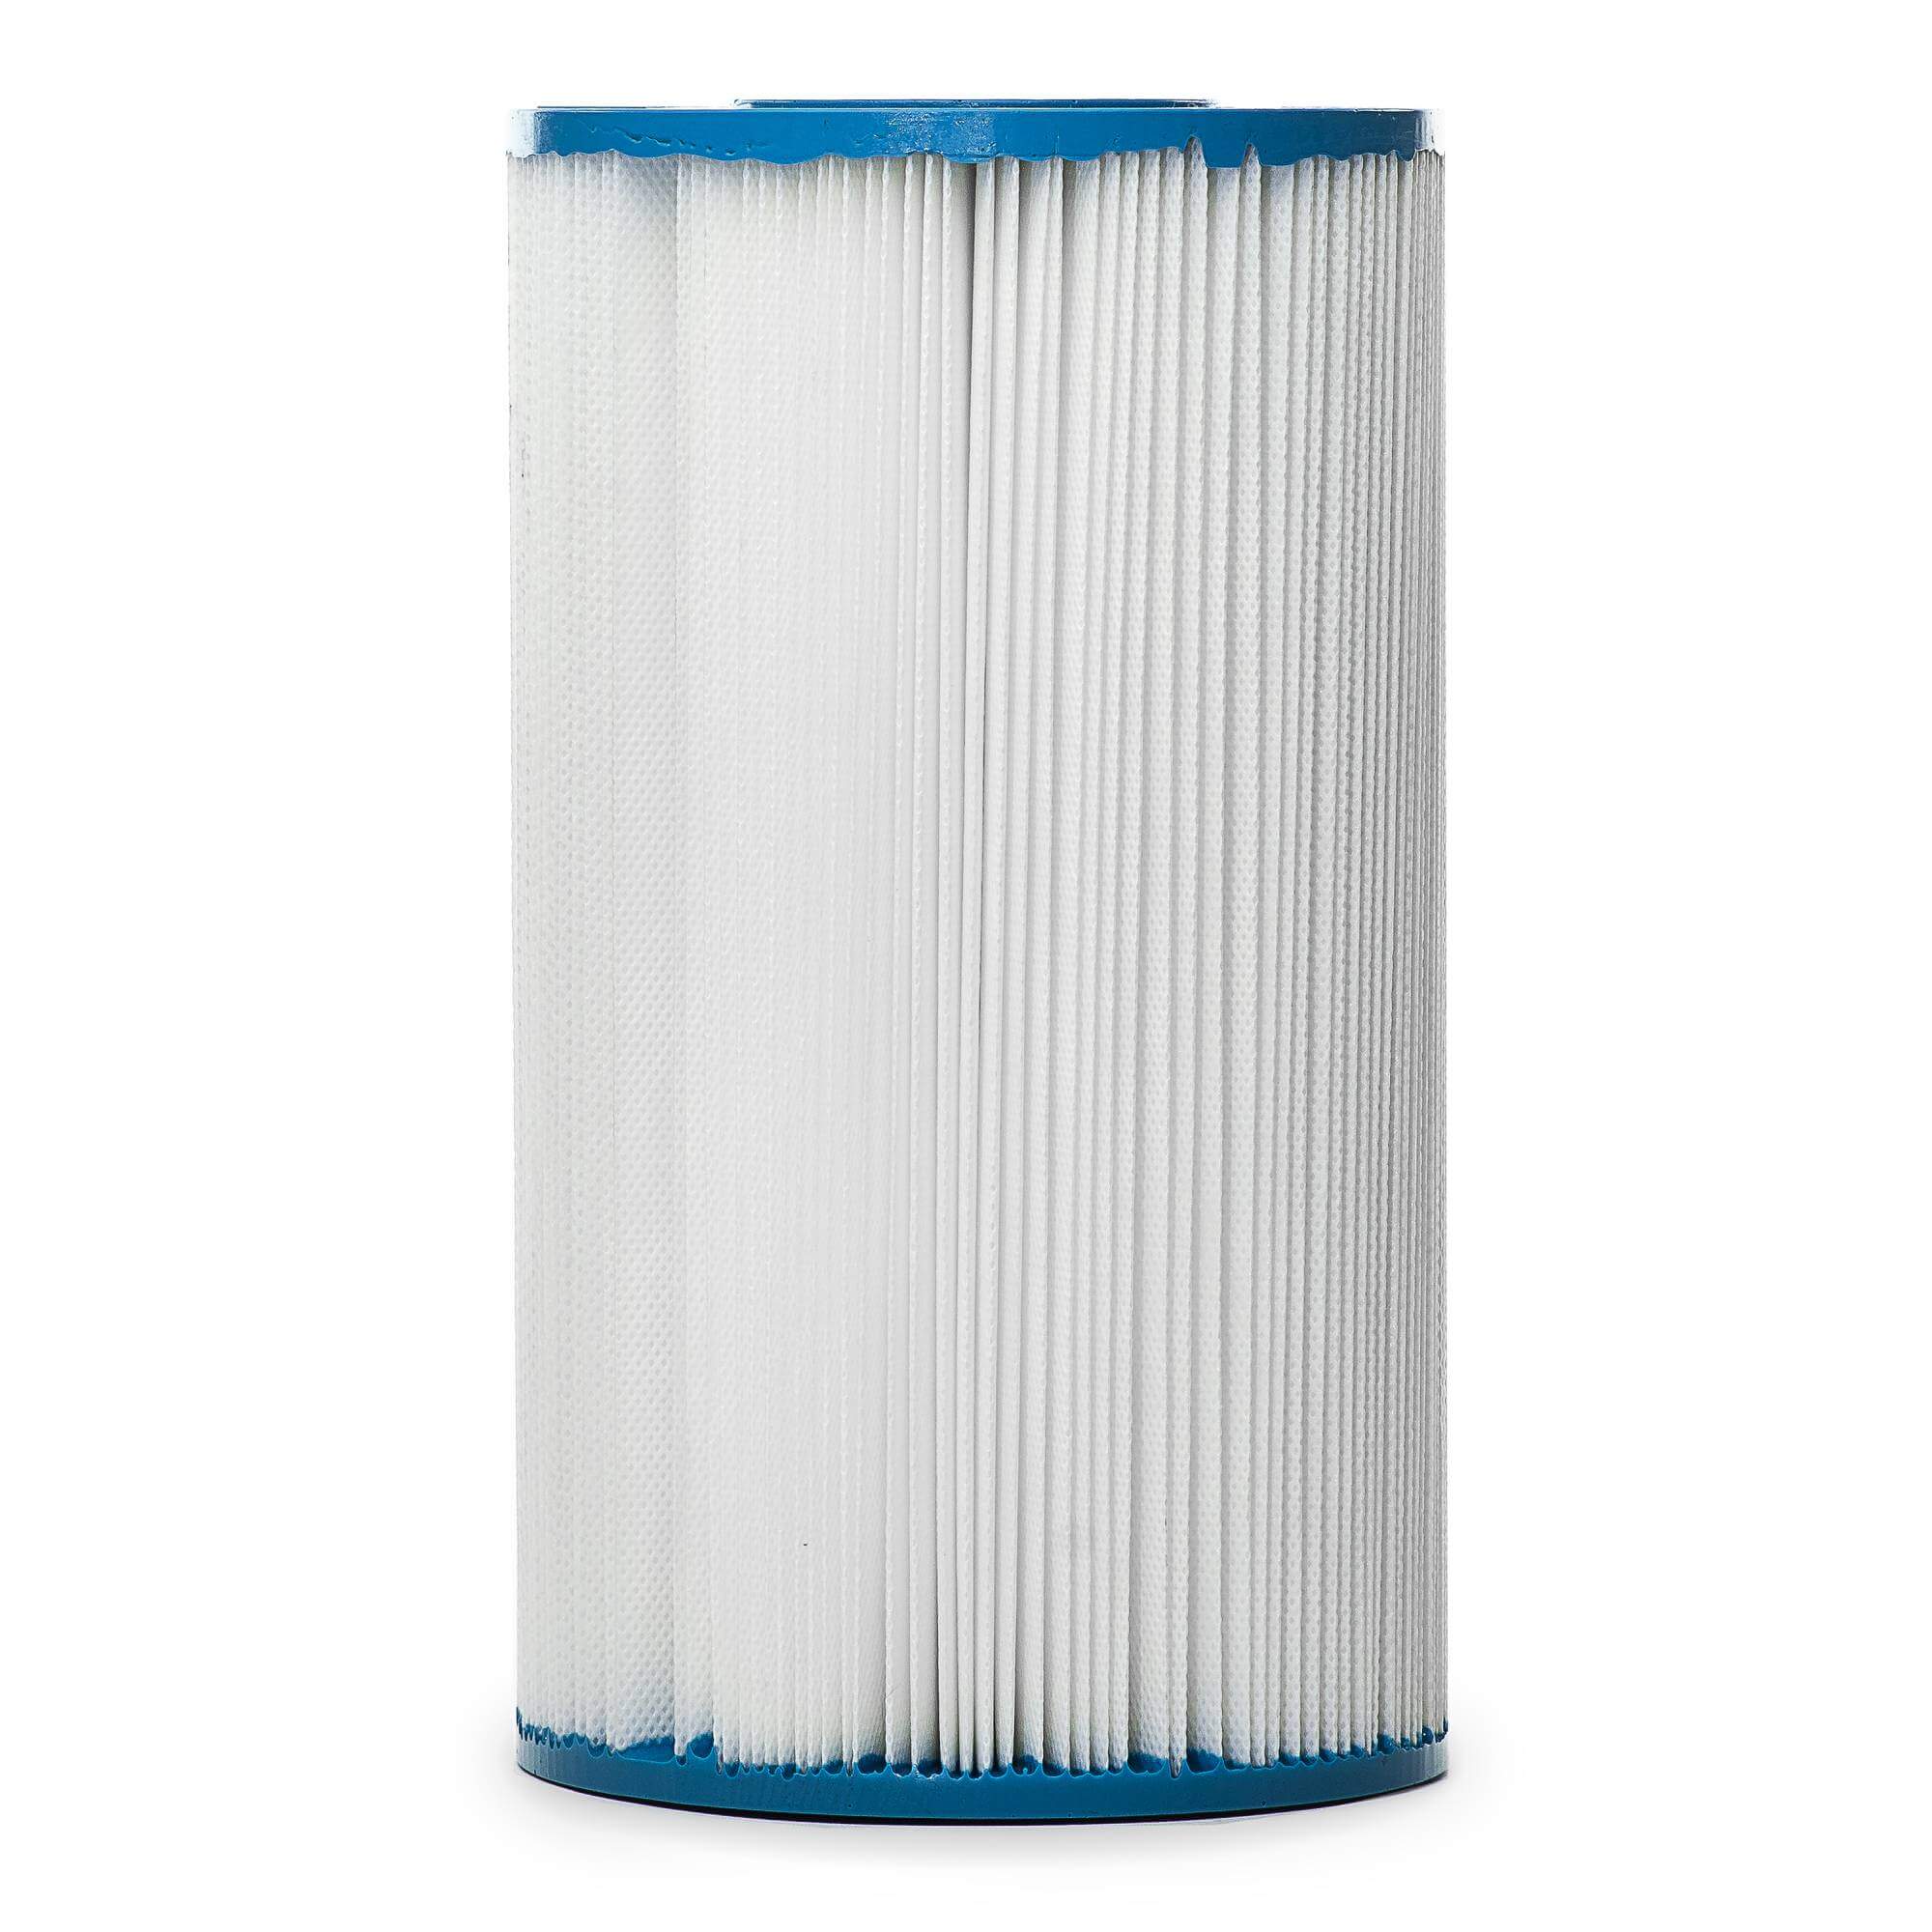 APCC7095 Filters Fast® FF-0141 Replacement for Apc APCC7095